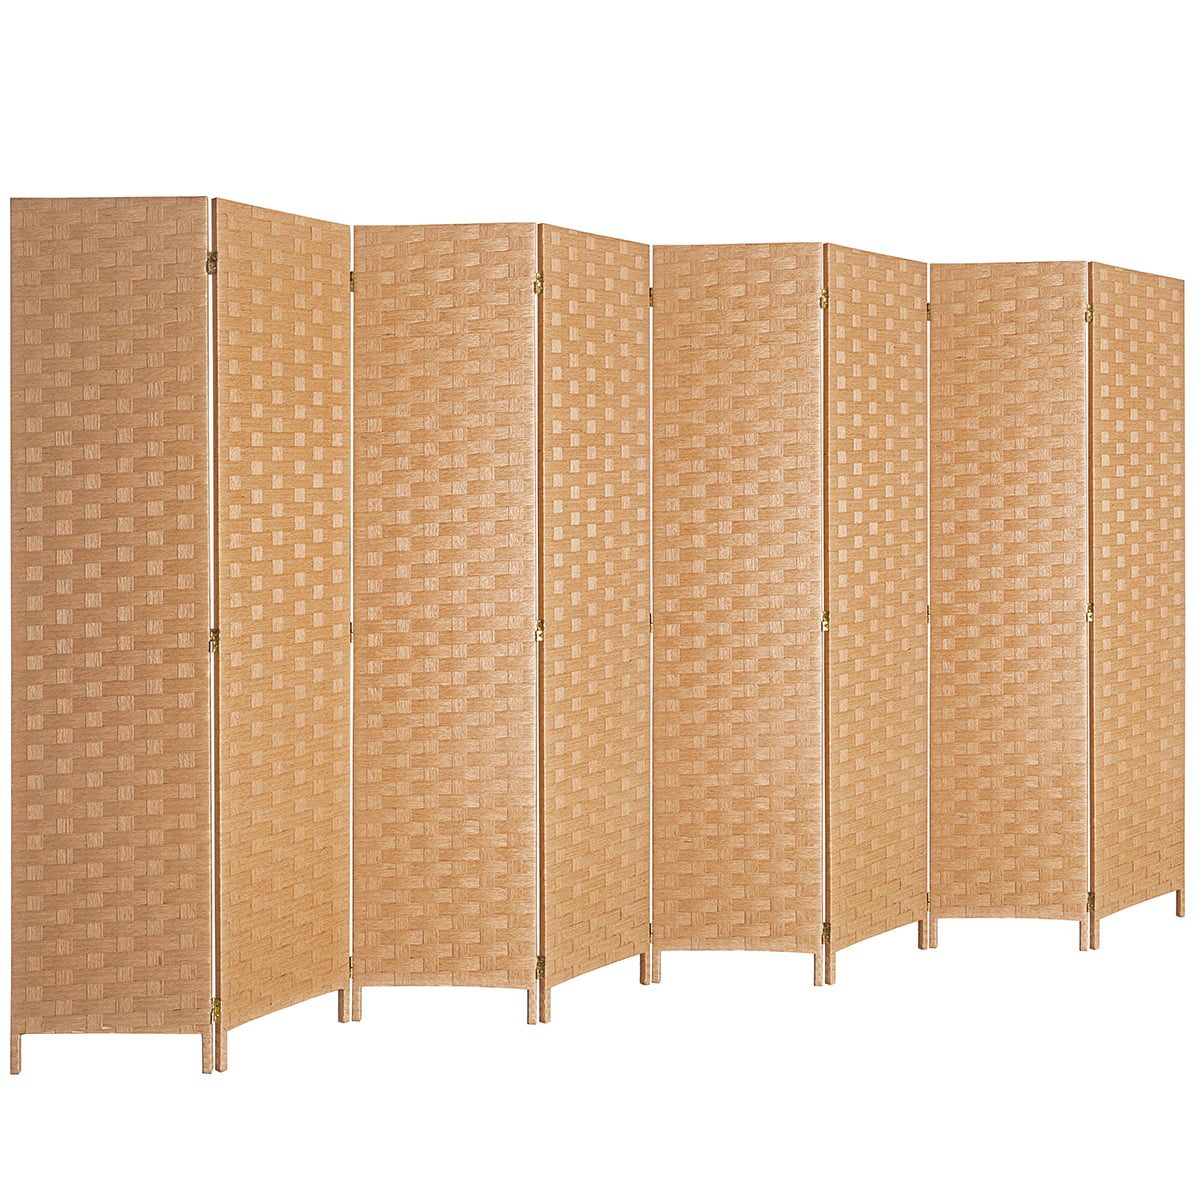 Room Divider Partition 4 Panel Privacy Screen 5.75 Ft Tall Privacy Wall Divider 68.9 x 15.75 Each Panel Folding Wood Screen for Home Office Bedroom Restaurant,Brown